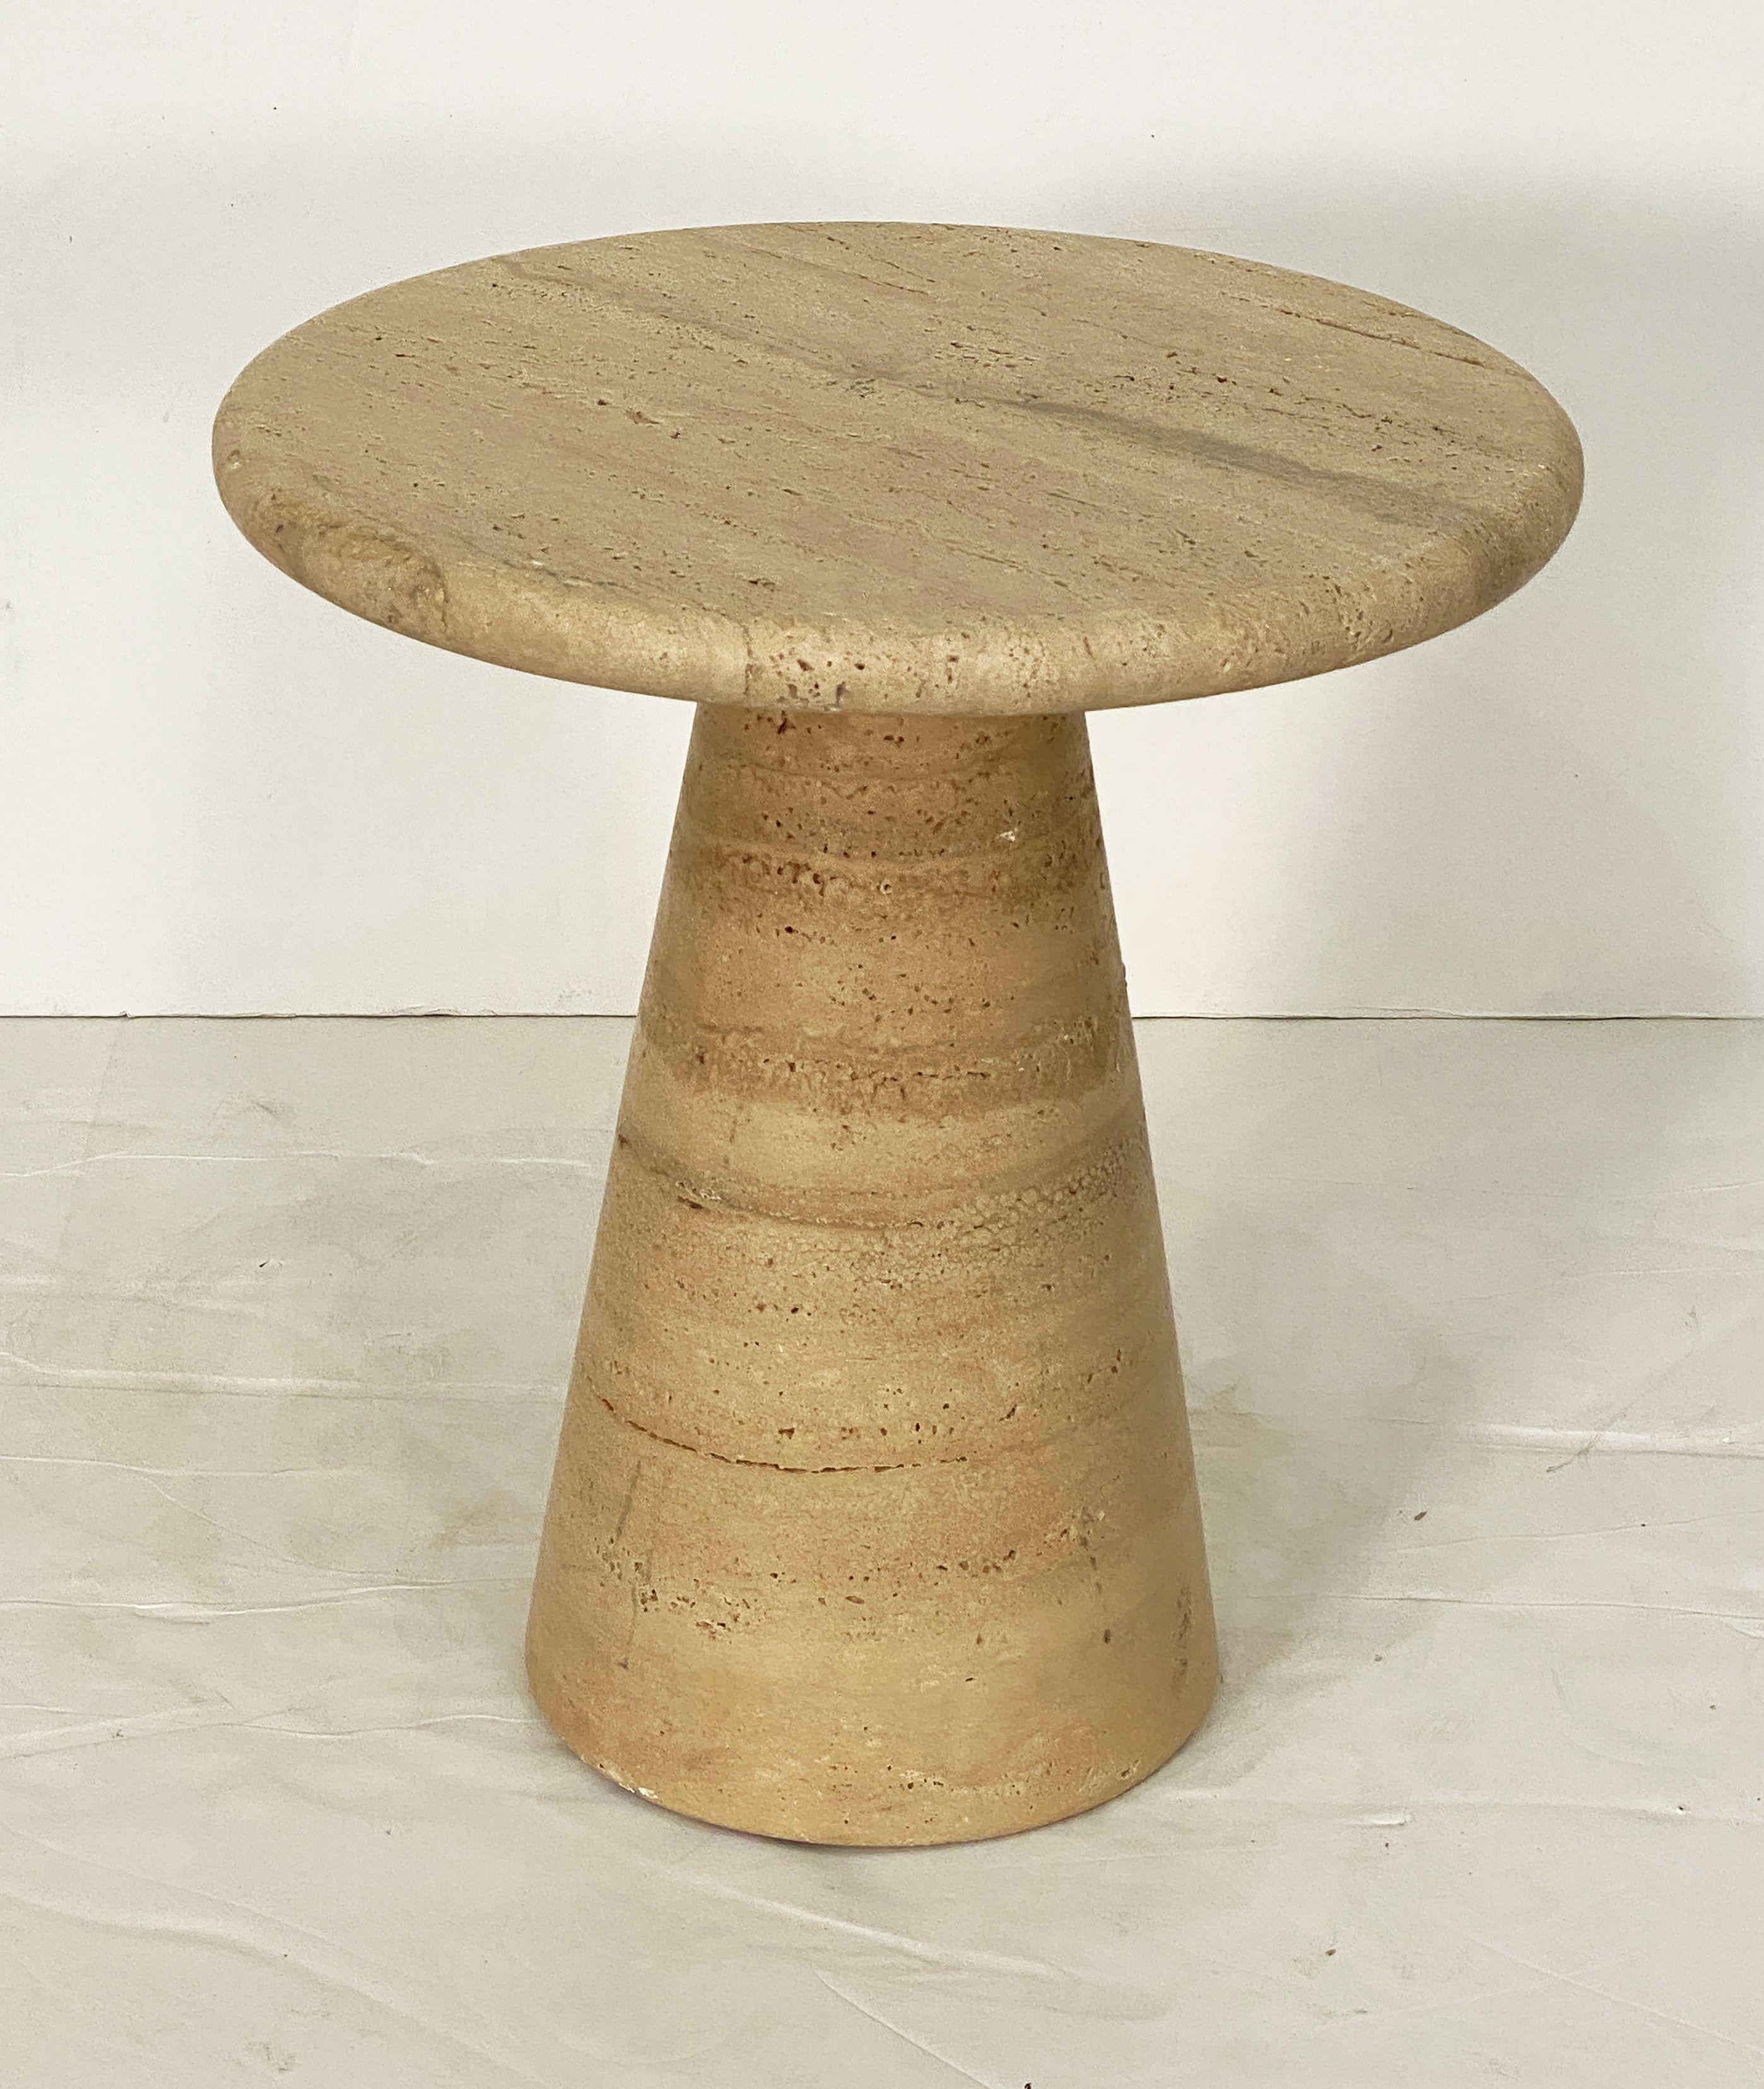 Modernist Conical Table of Travertine Stone from Italy (Four Available) For Sale 4